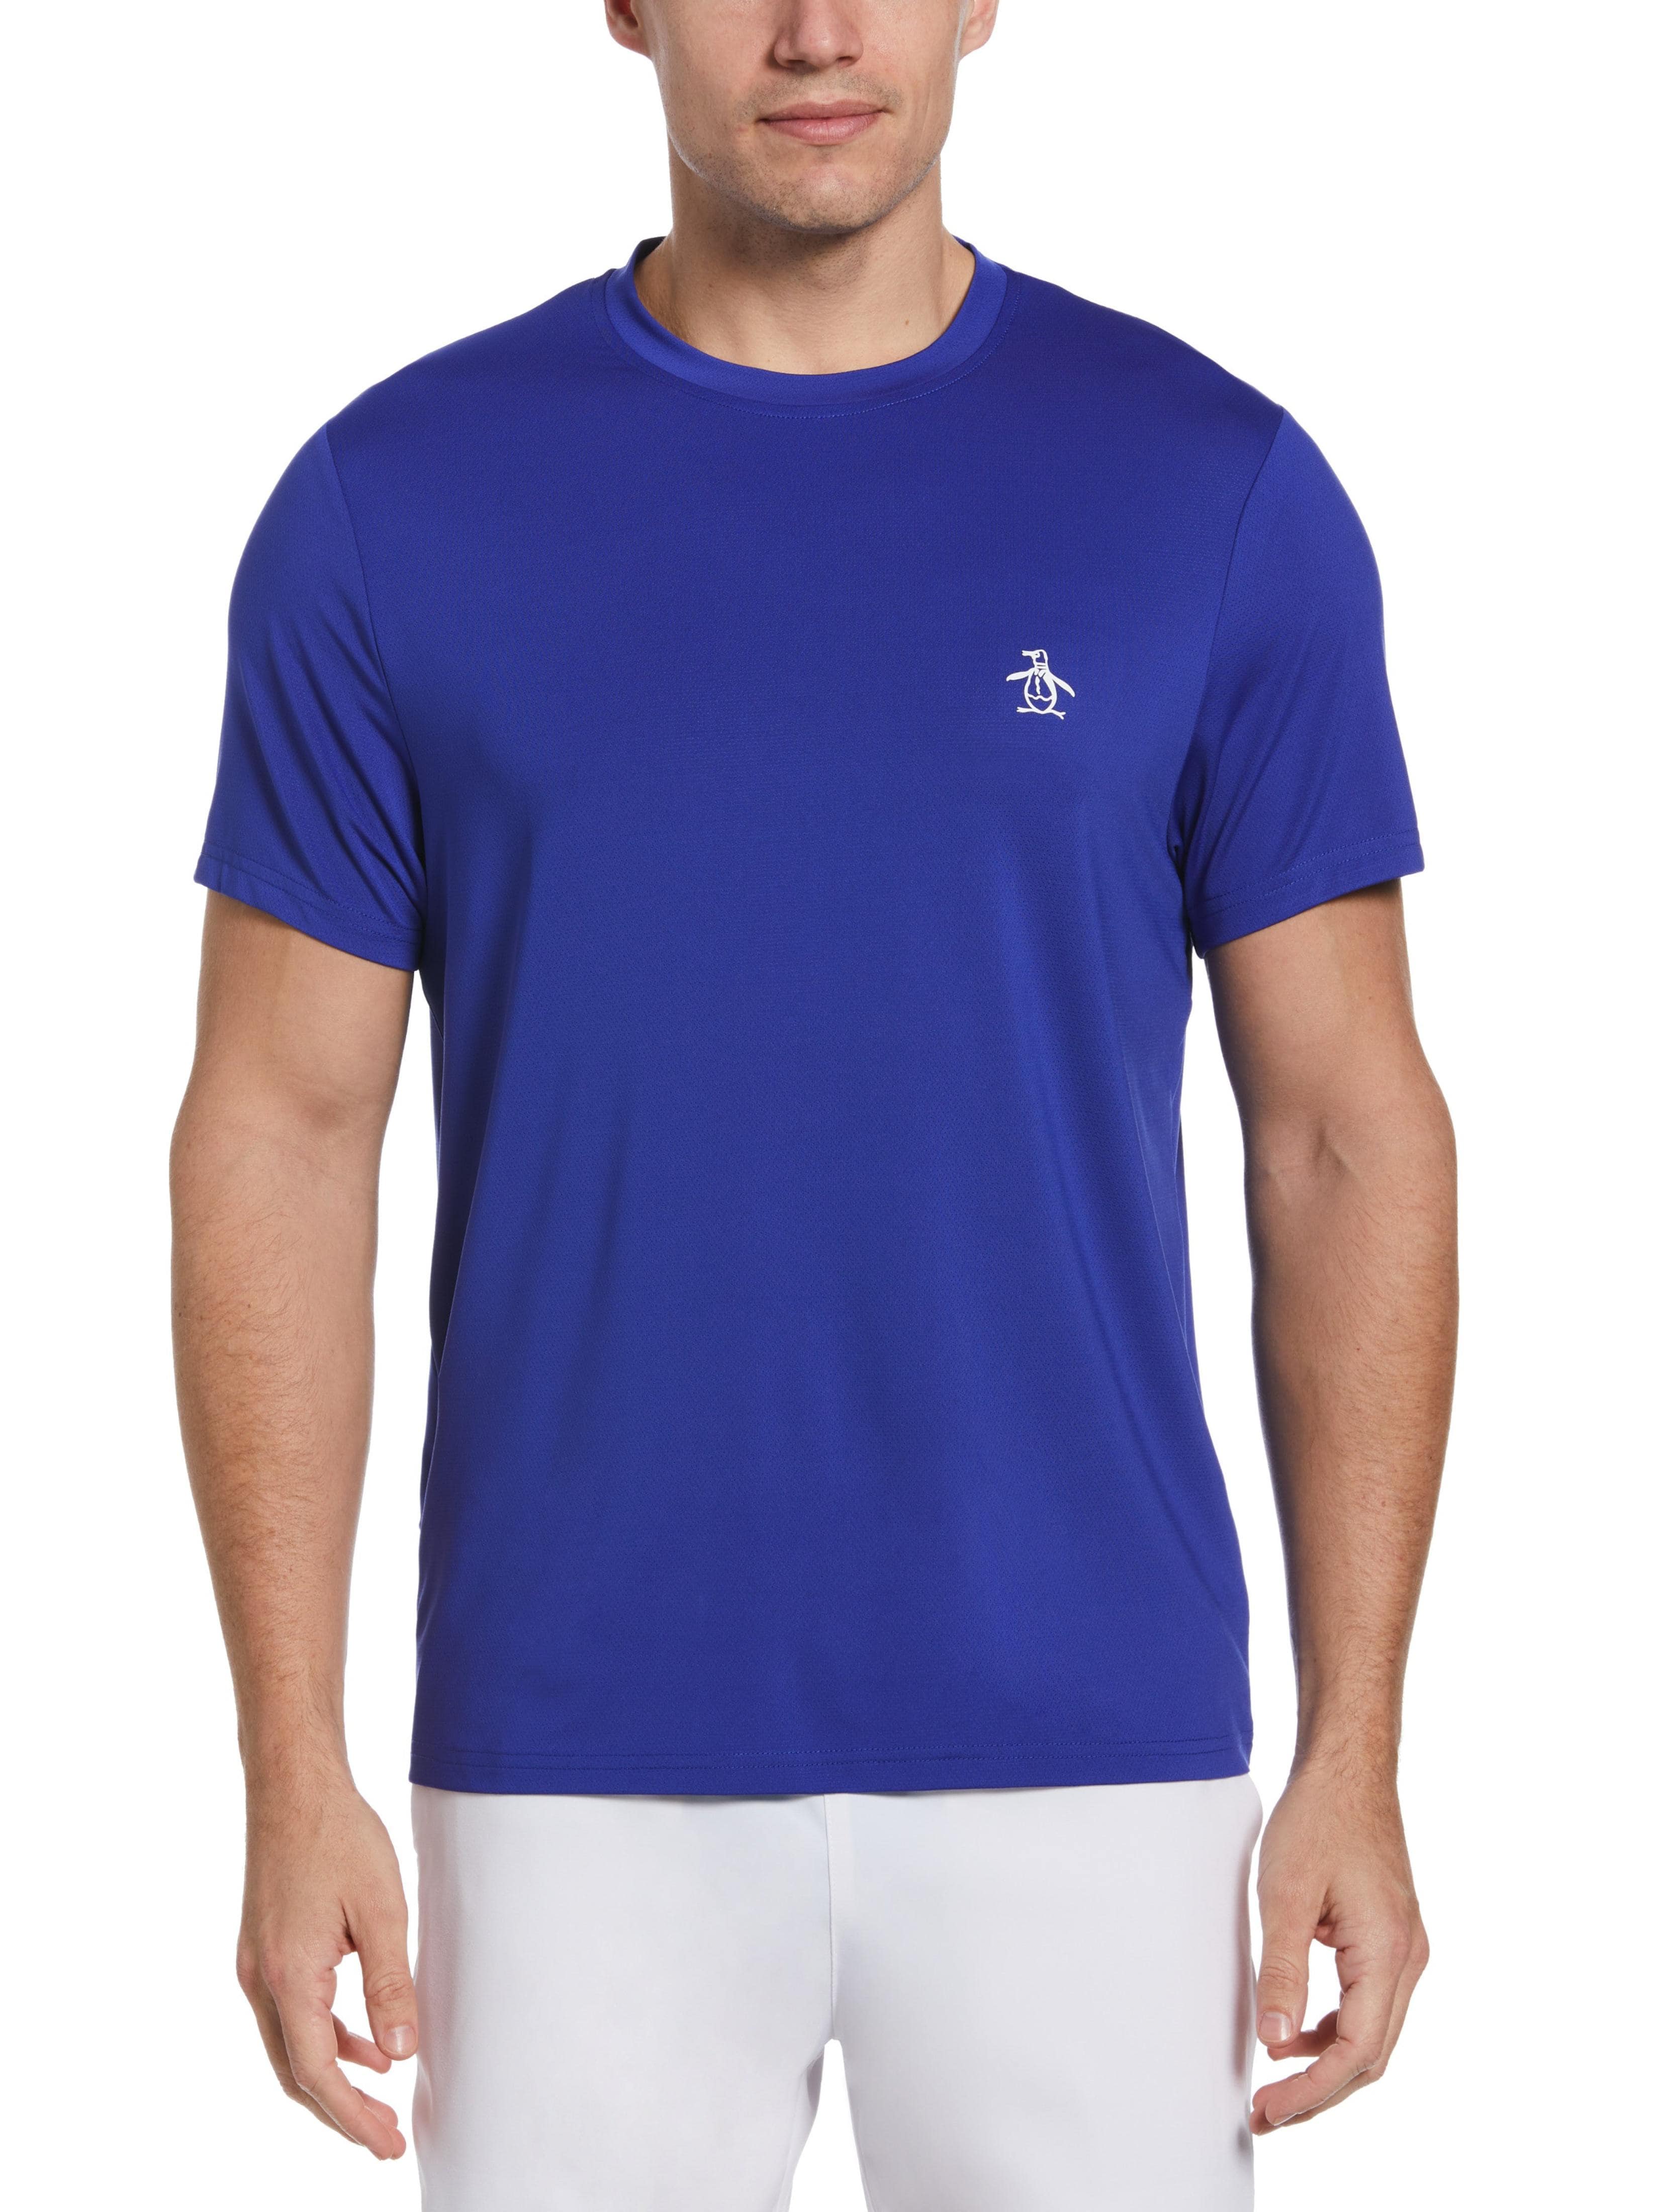 Original Penguin Mens Solid Performance Tennis T-Shirt, Size XL, Blueing, Polyester/Recycled Polyester/Elastane | Golf Apparel Shop